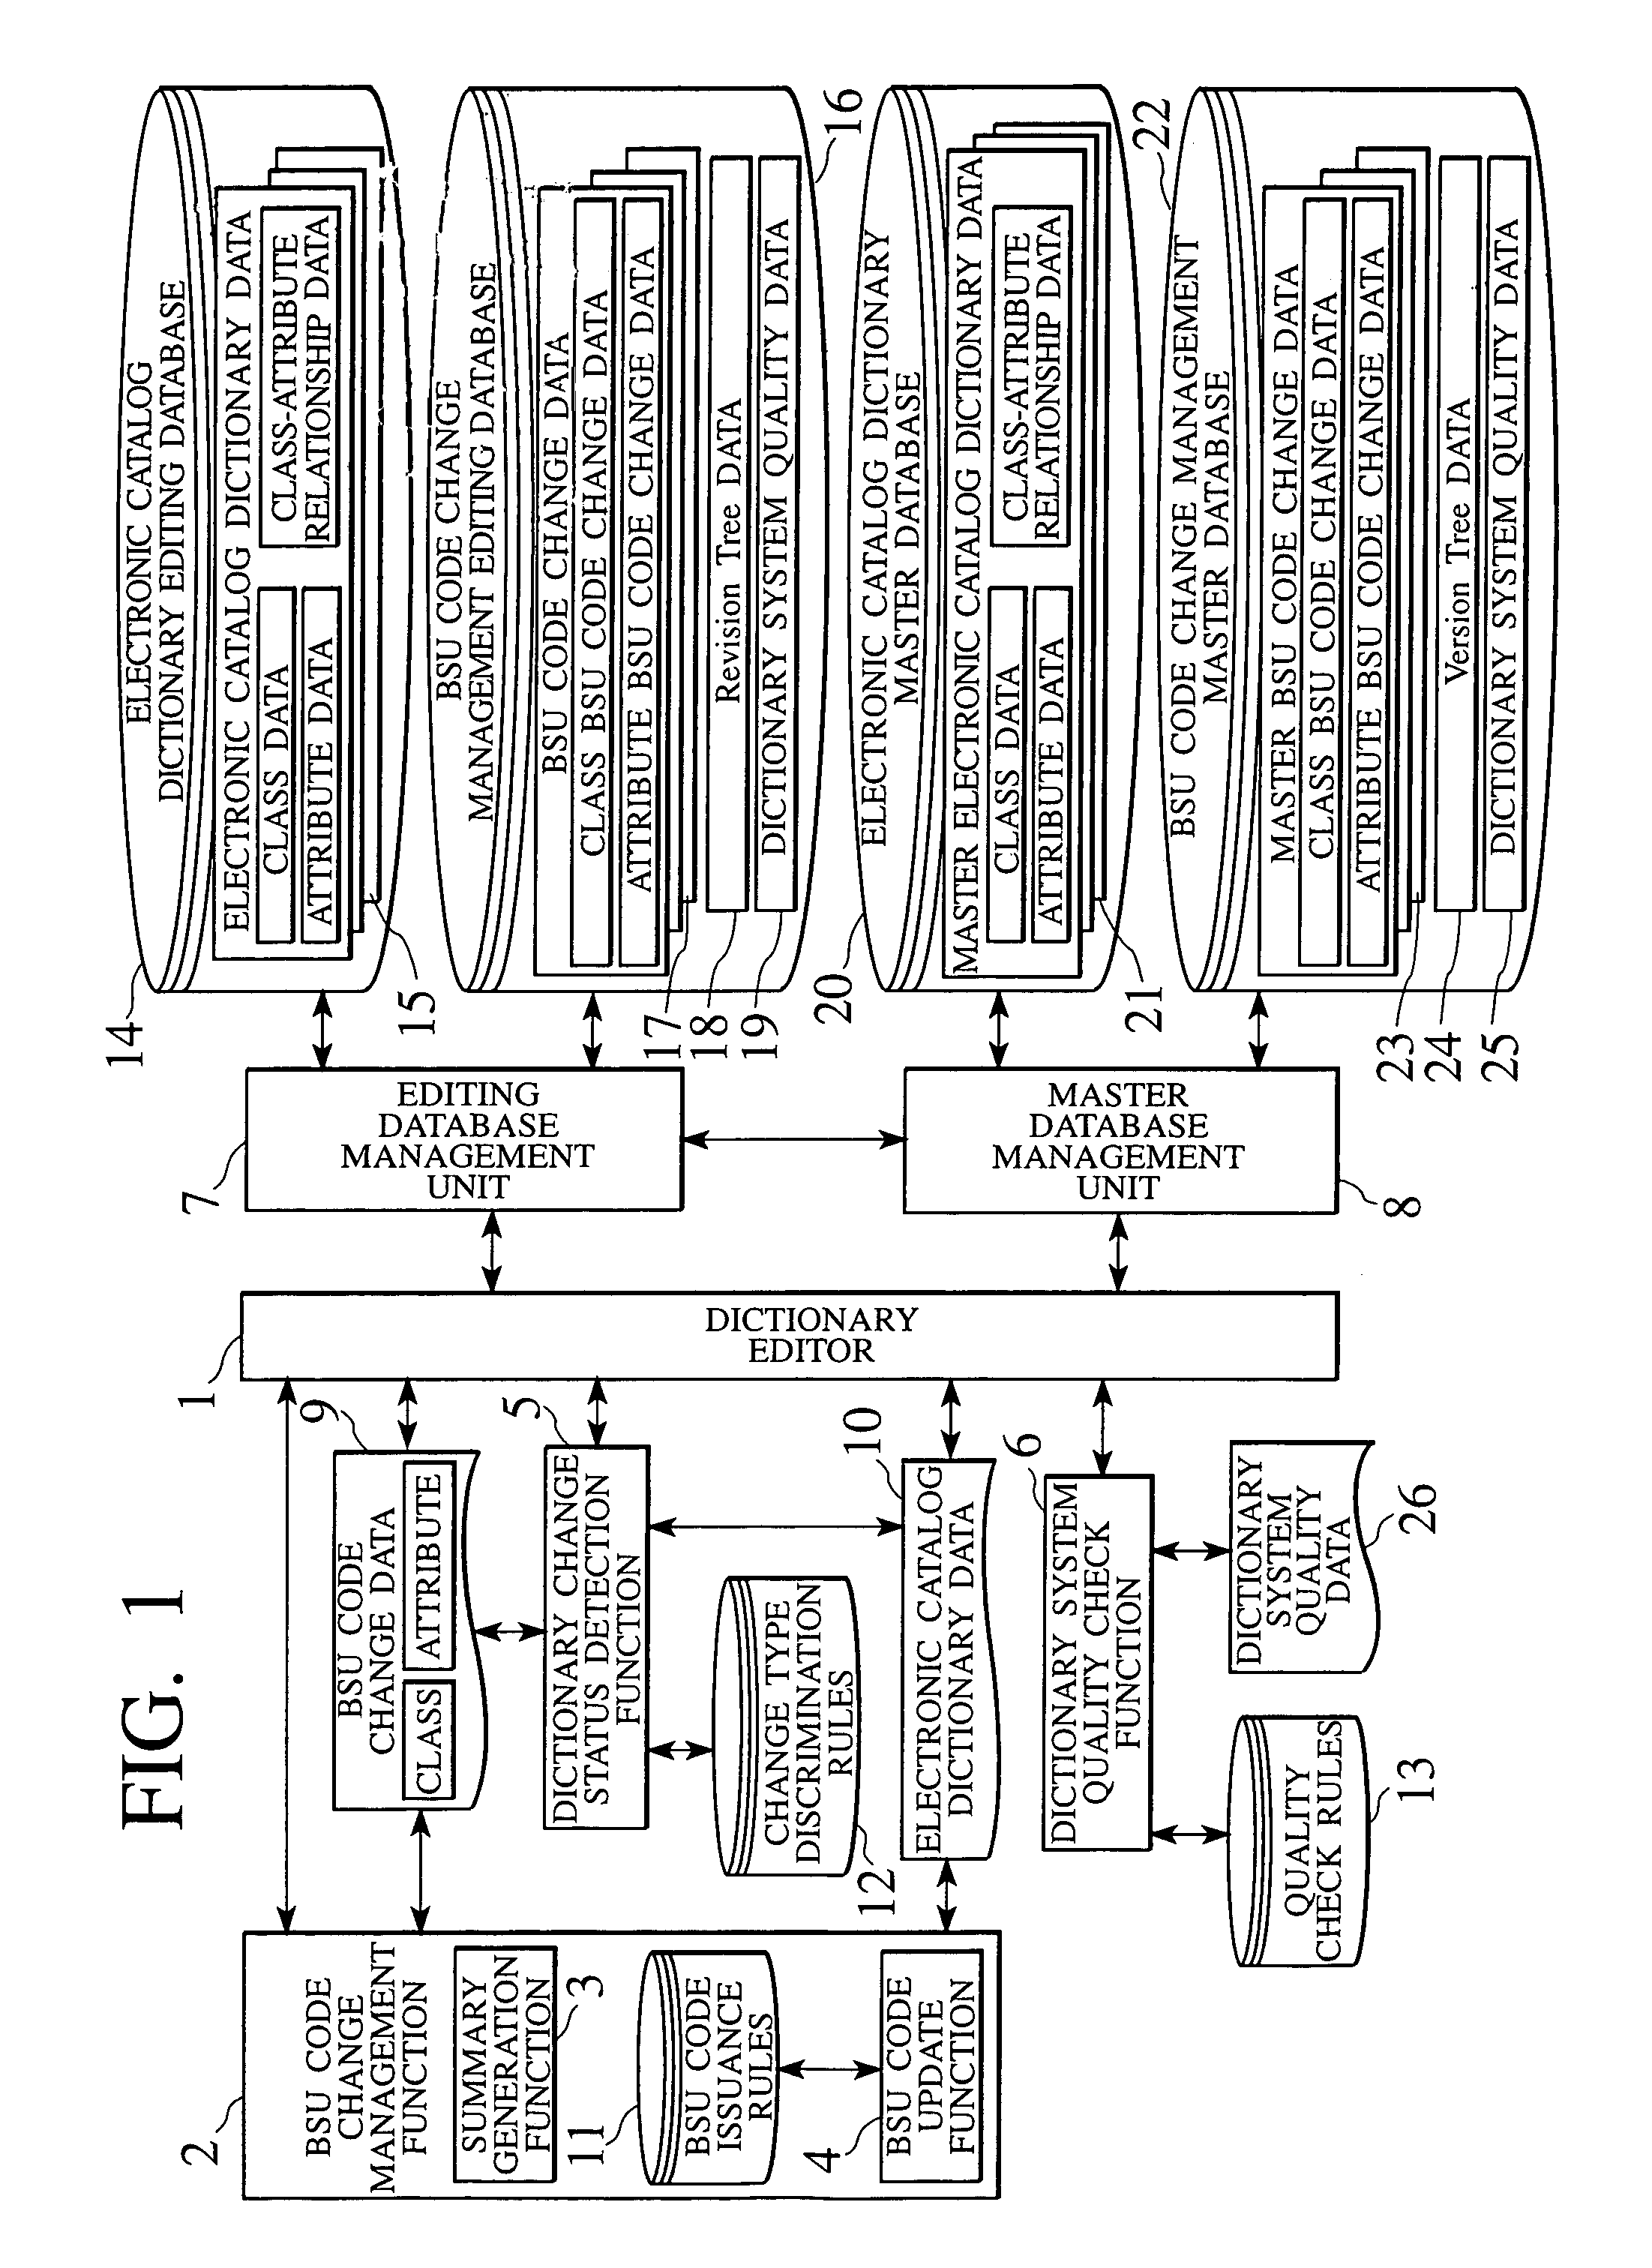 Electronic catalog maintenance system for enabling out-of-standard electronic catalog changes